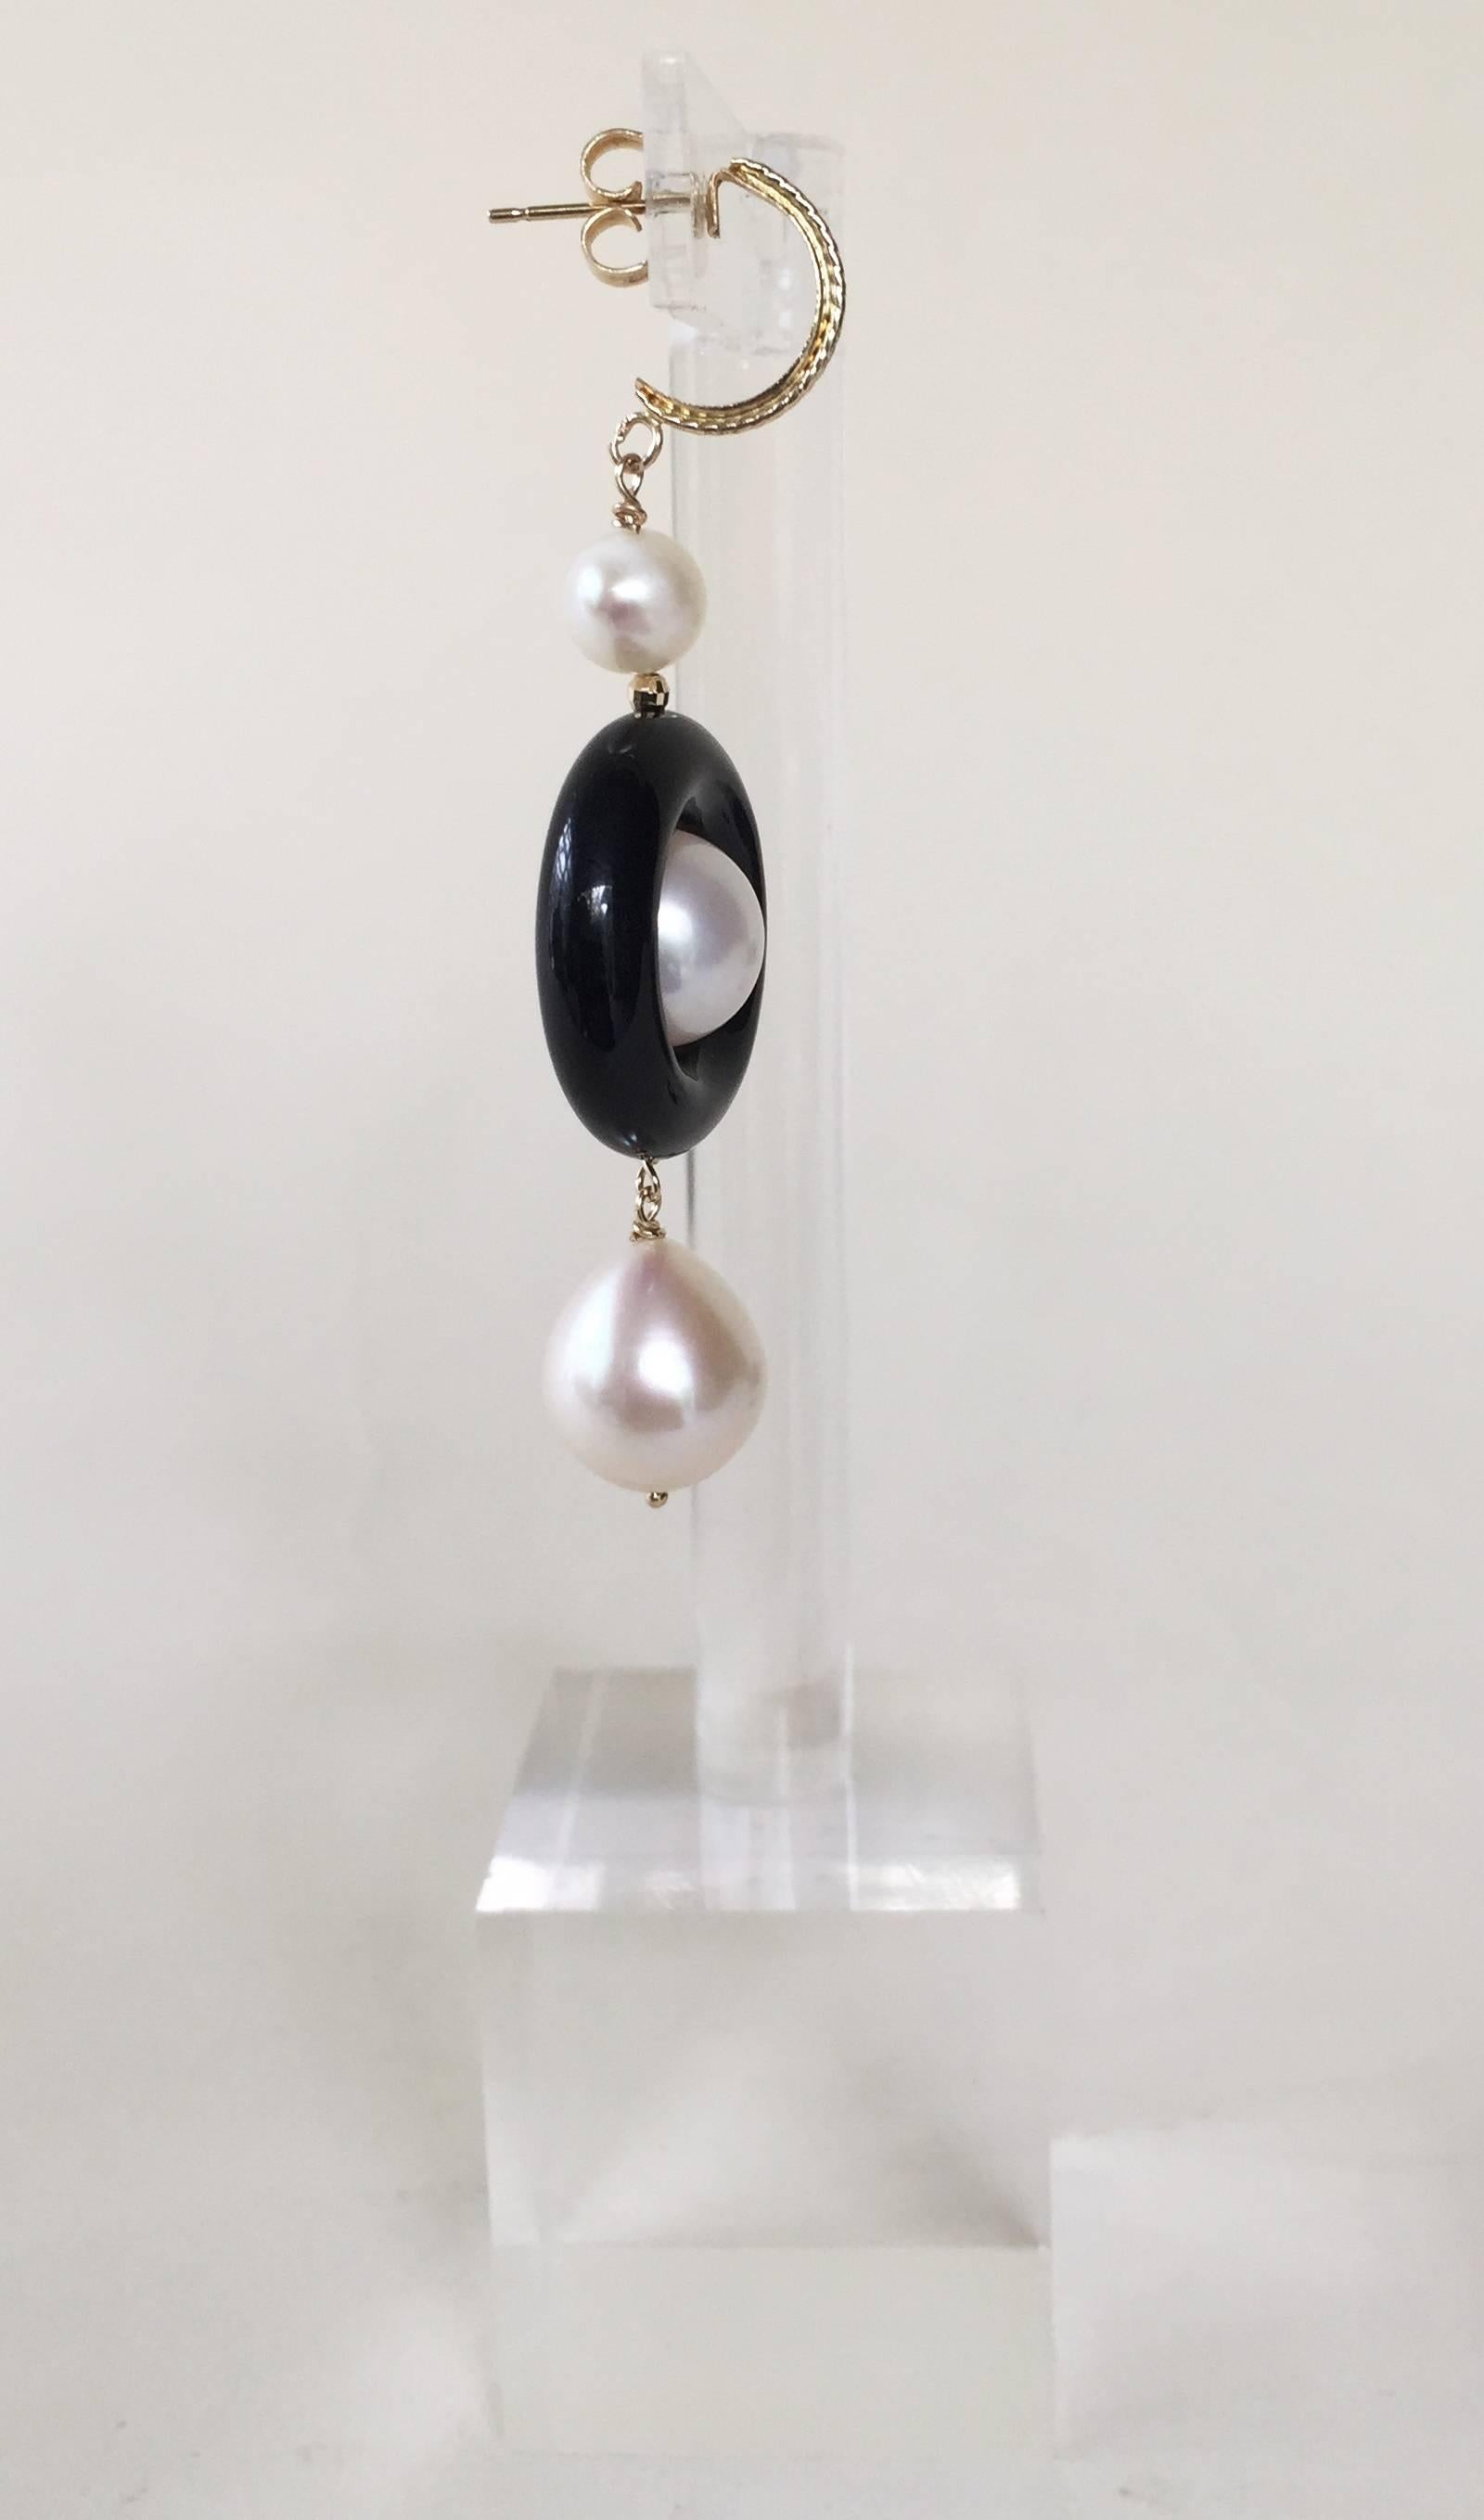 Bold pair of Black and White Earrings by Marina J. This striking pair features high luster White Pearls and Black Onyx. Measuring 2.4 inches each, this dramatic Art Deco inspired pair hangs off solid 14k Yellow Gold textured Round Studs.

** For any